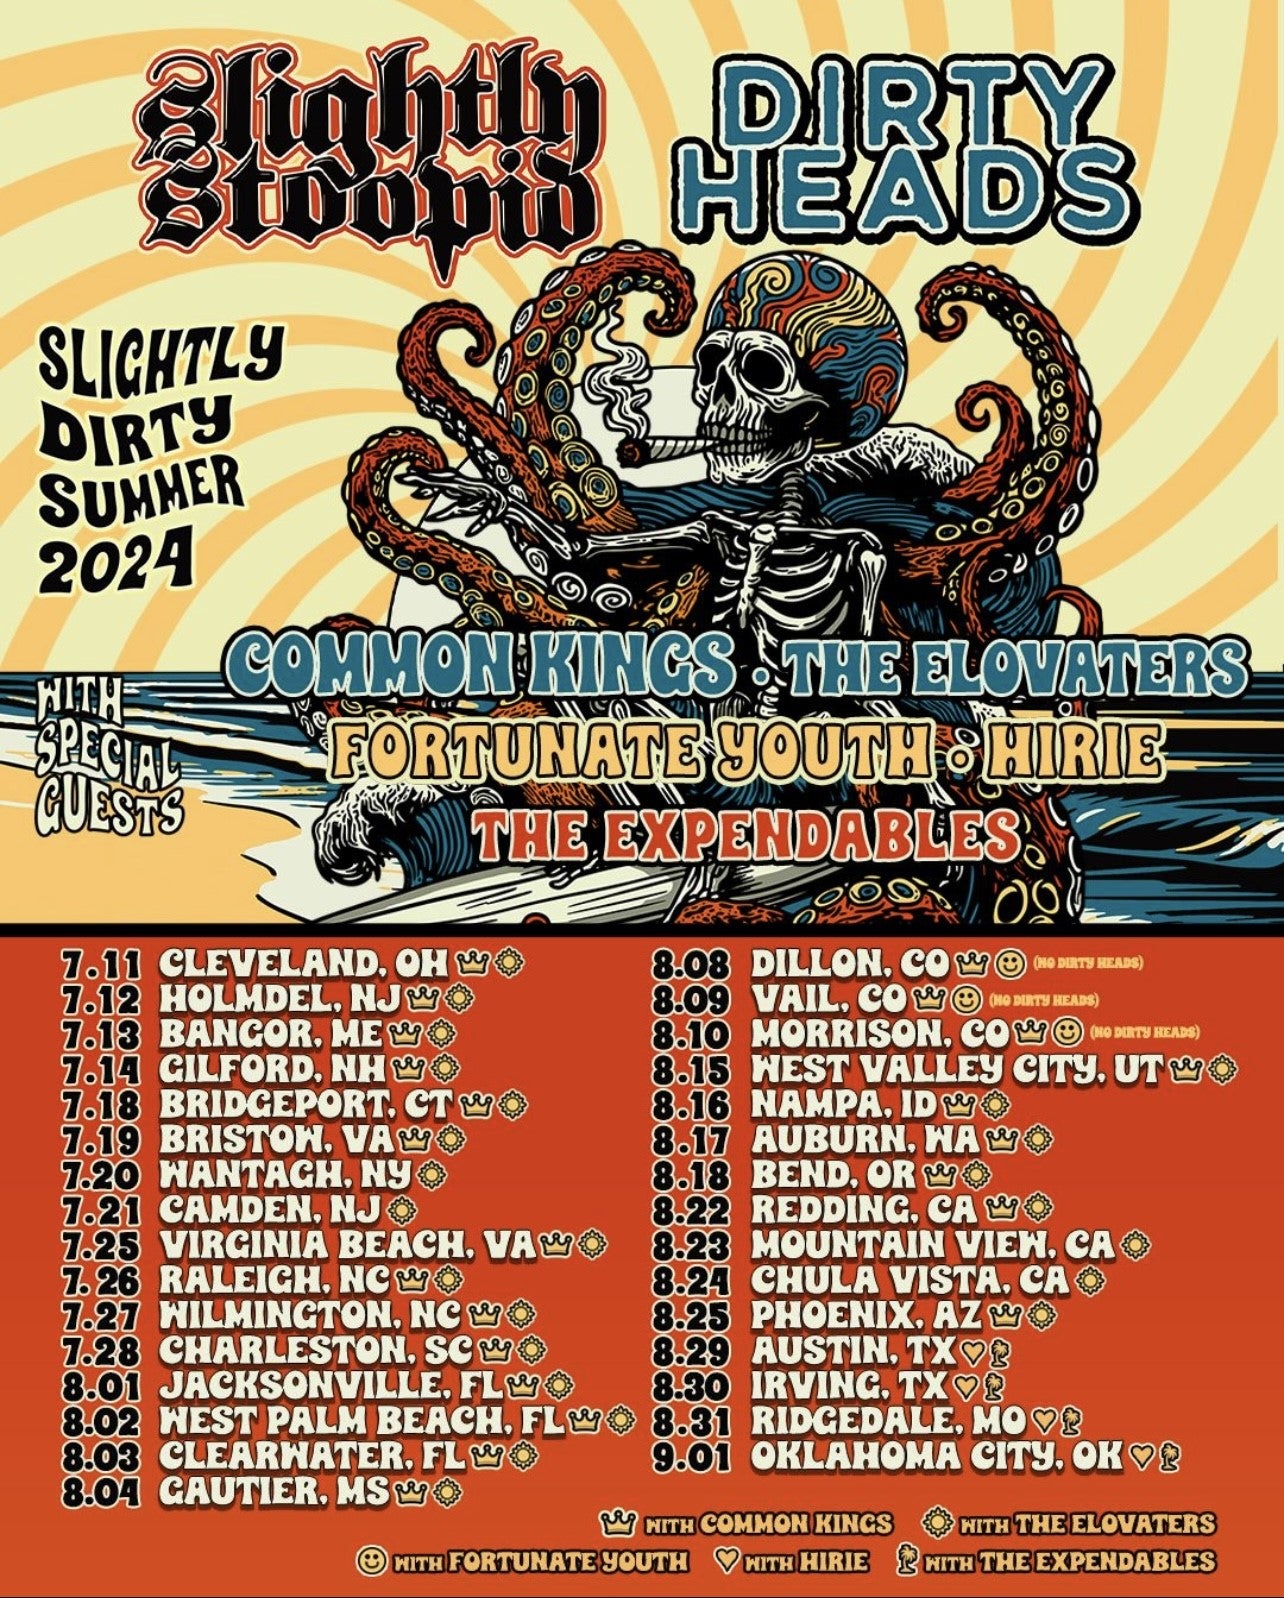 SLIGHTLY STOOPID X DIRTY HEADS SUMMER TOUR ANNOUNCED